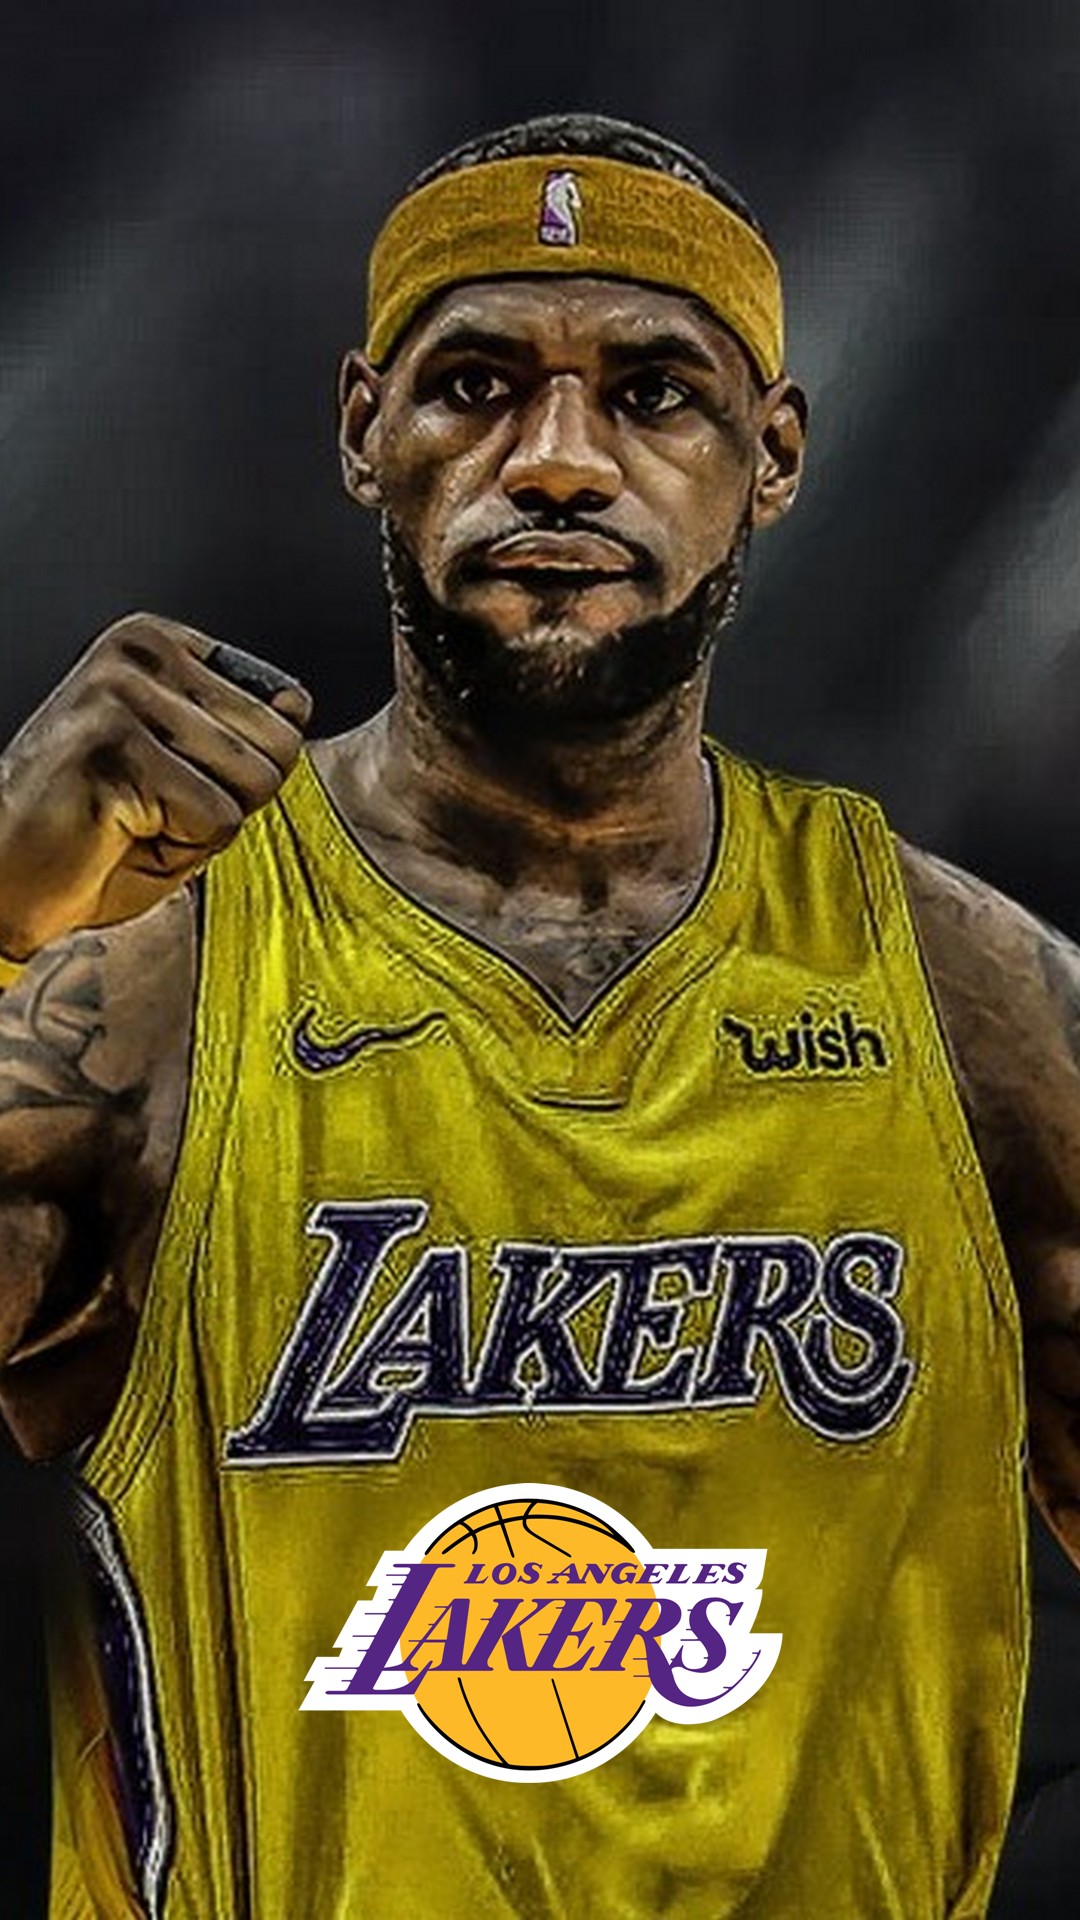 LeBron James Lakers HD Wallpaper For iPhone with image dimensions 1080x1920 pixel. You can make this wallpaper for your Desktop Computer Backgrounds, Windows or Mac Screensavers, iPhone Lock screen, Tablet or Android and another Mobile Phone device